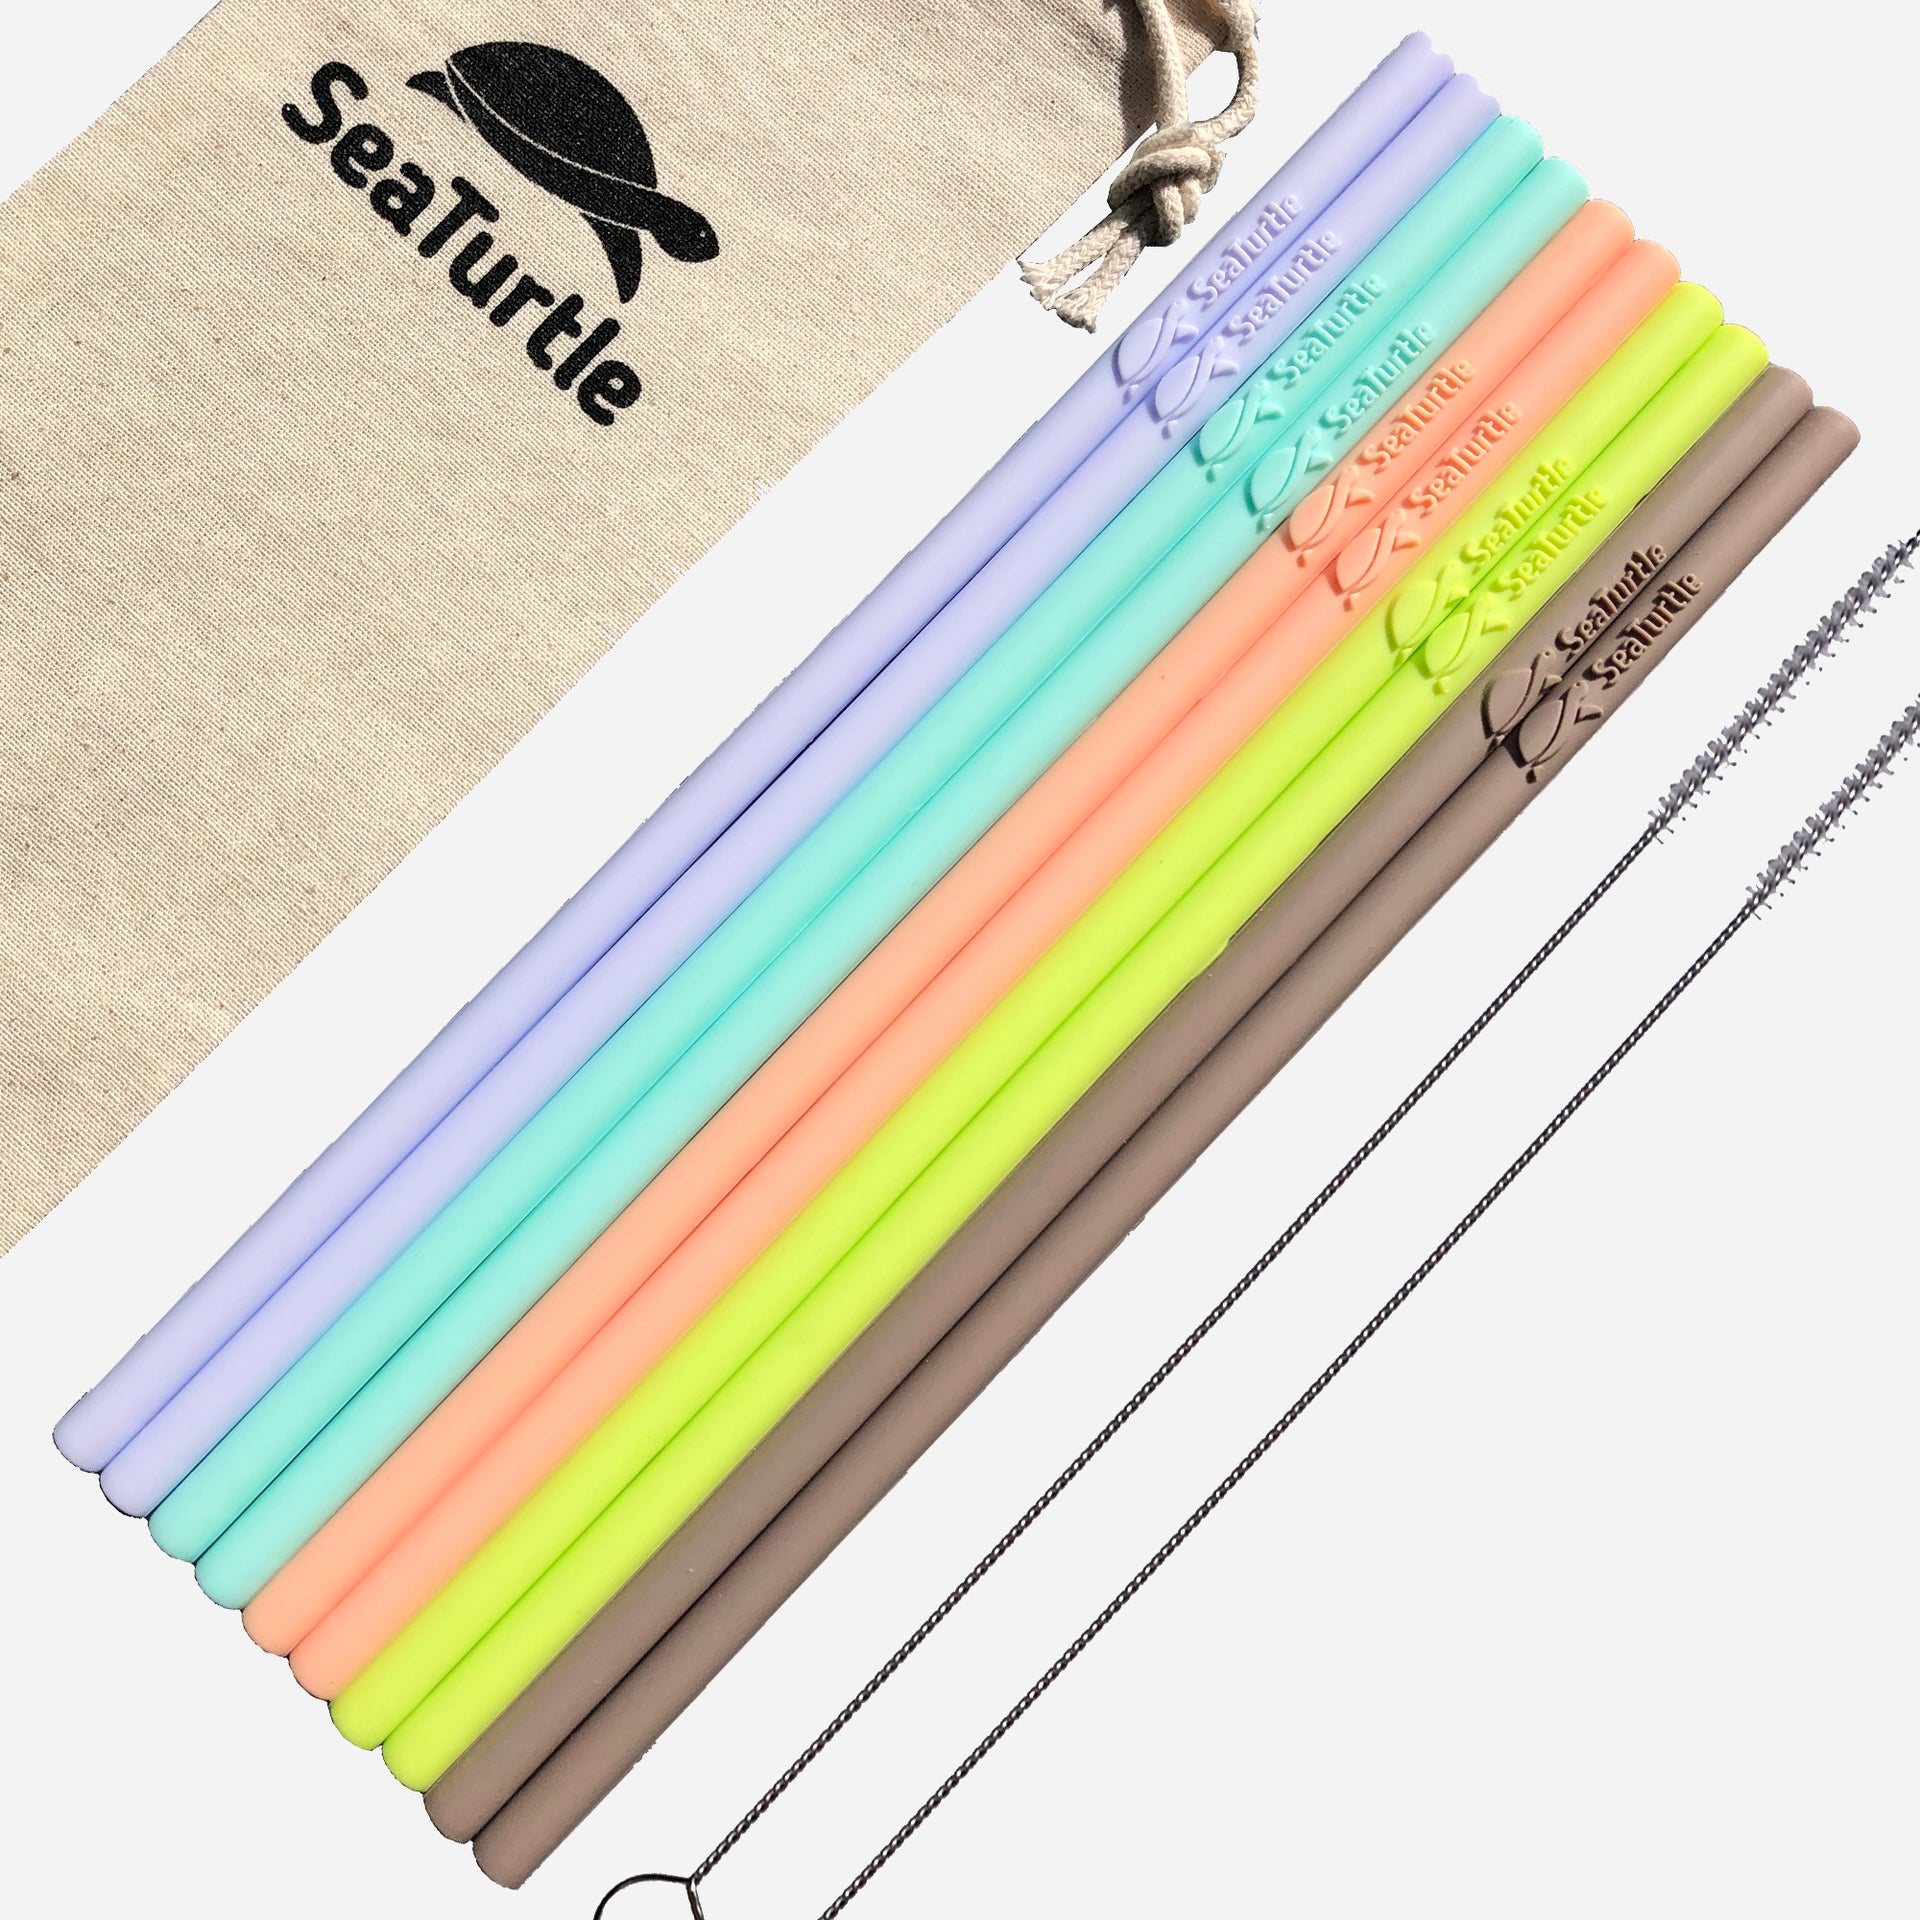 Reusable Straws: Protect Your Teeth And The Environment